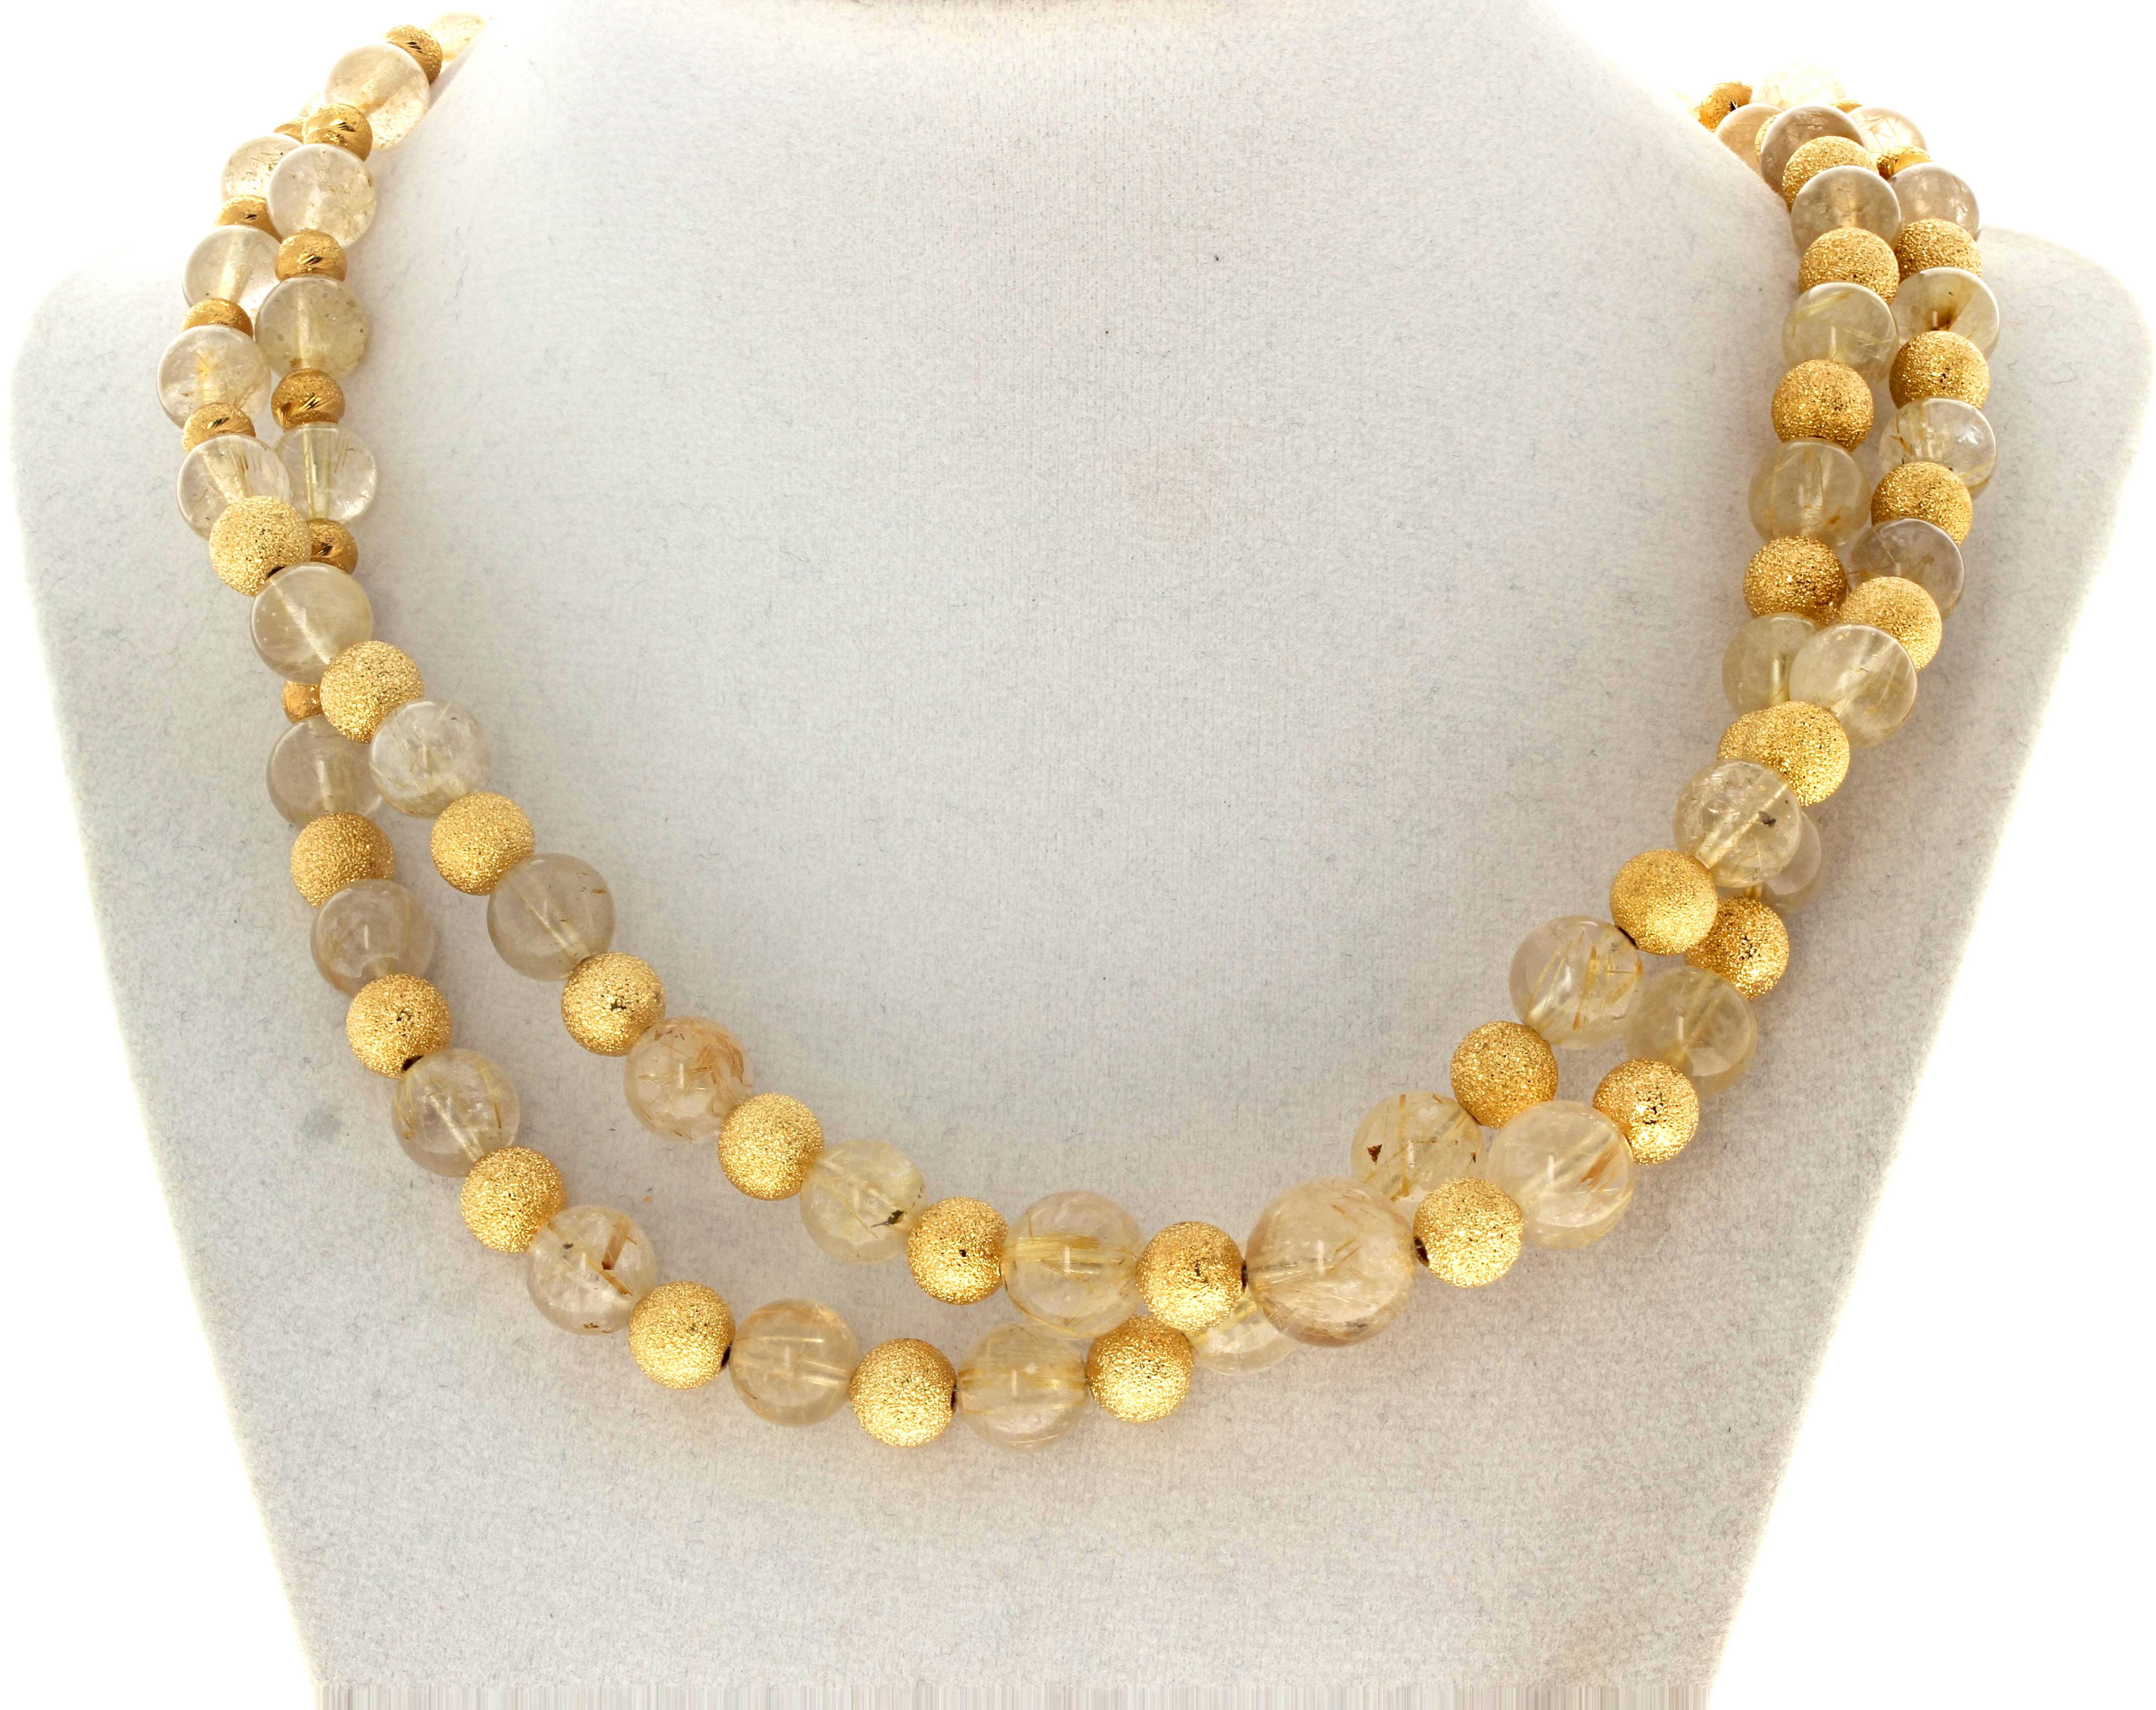 This fascinating beautiful double strand of glowing natural rutilated Quartz - largest approximately 13mm - is enhanced with large beautiful real gold plated rondels - largest approximately 8mm - in this 19 inch long necklace.  The clasp is and easy